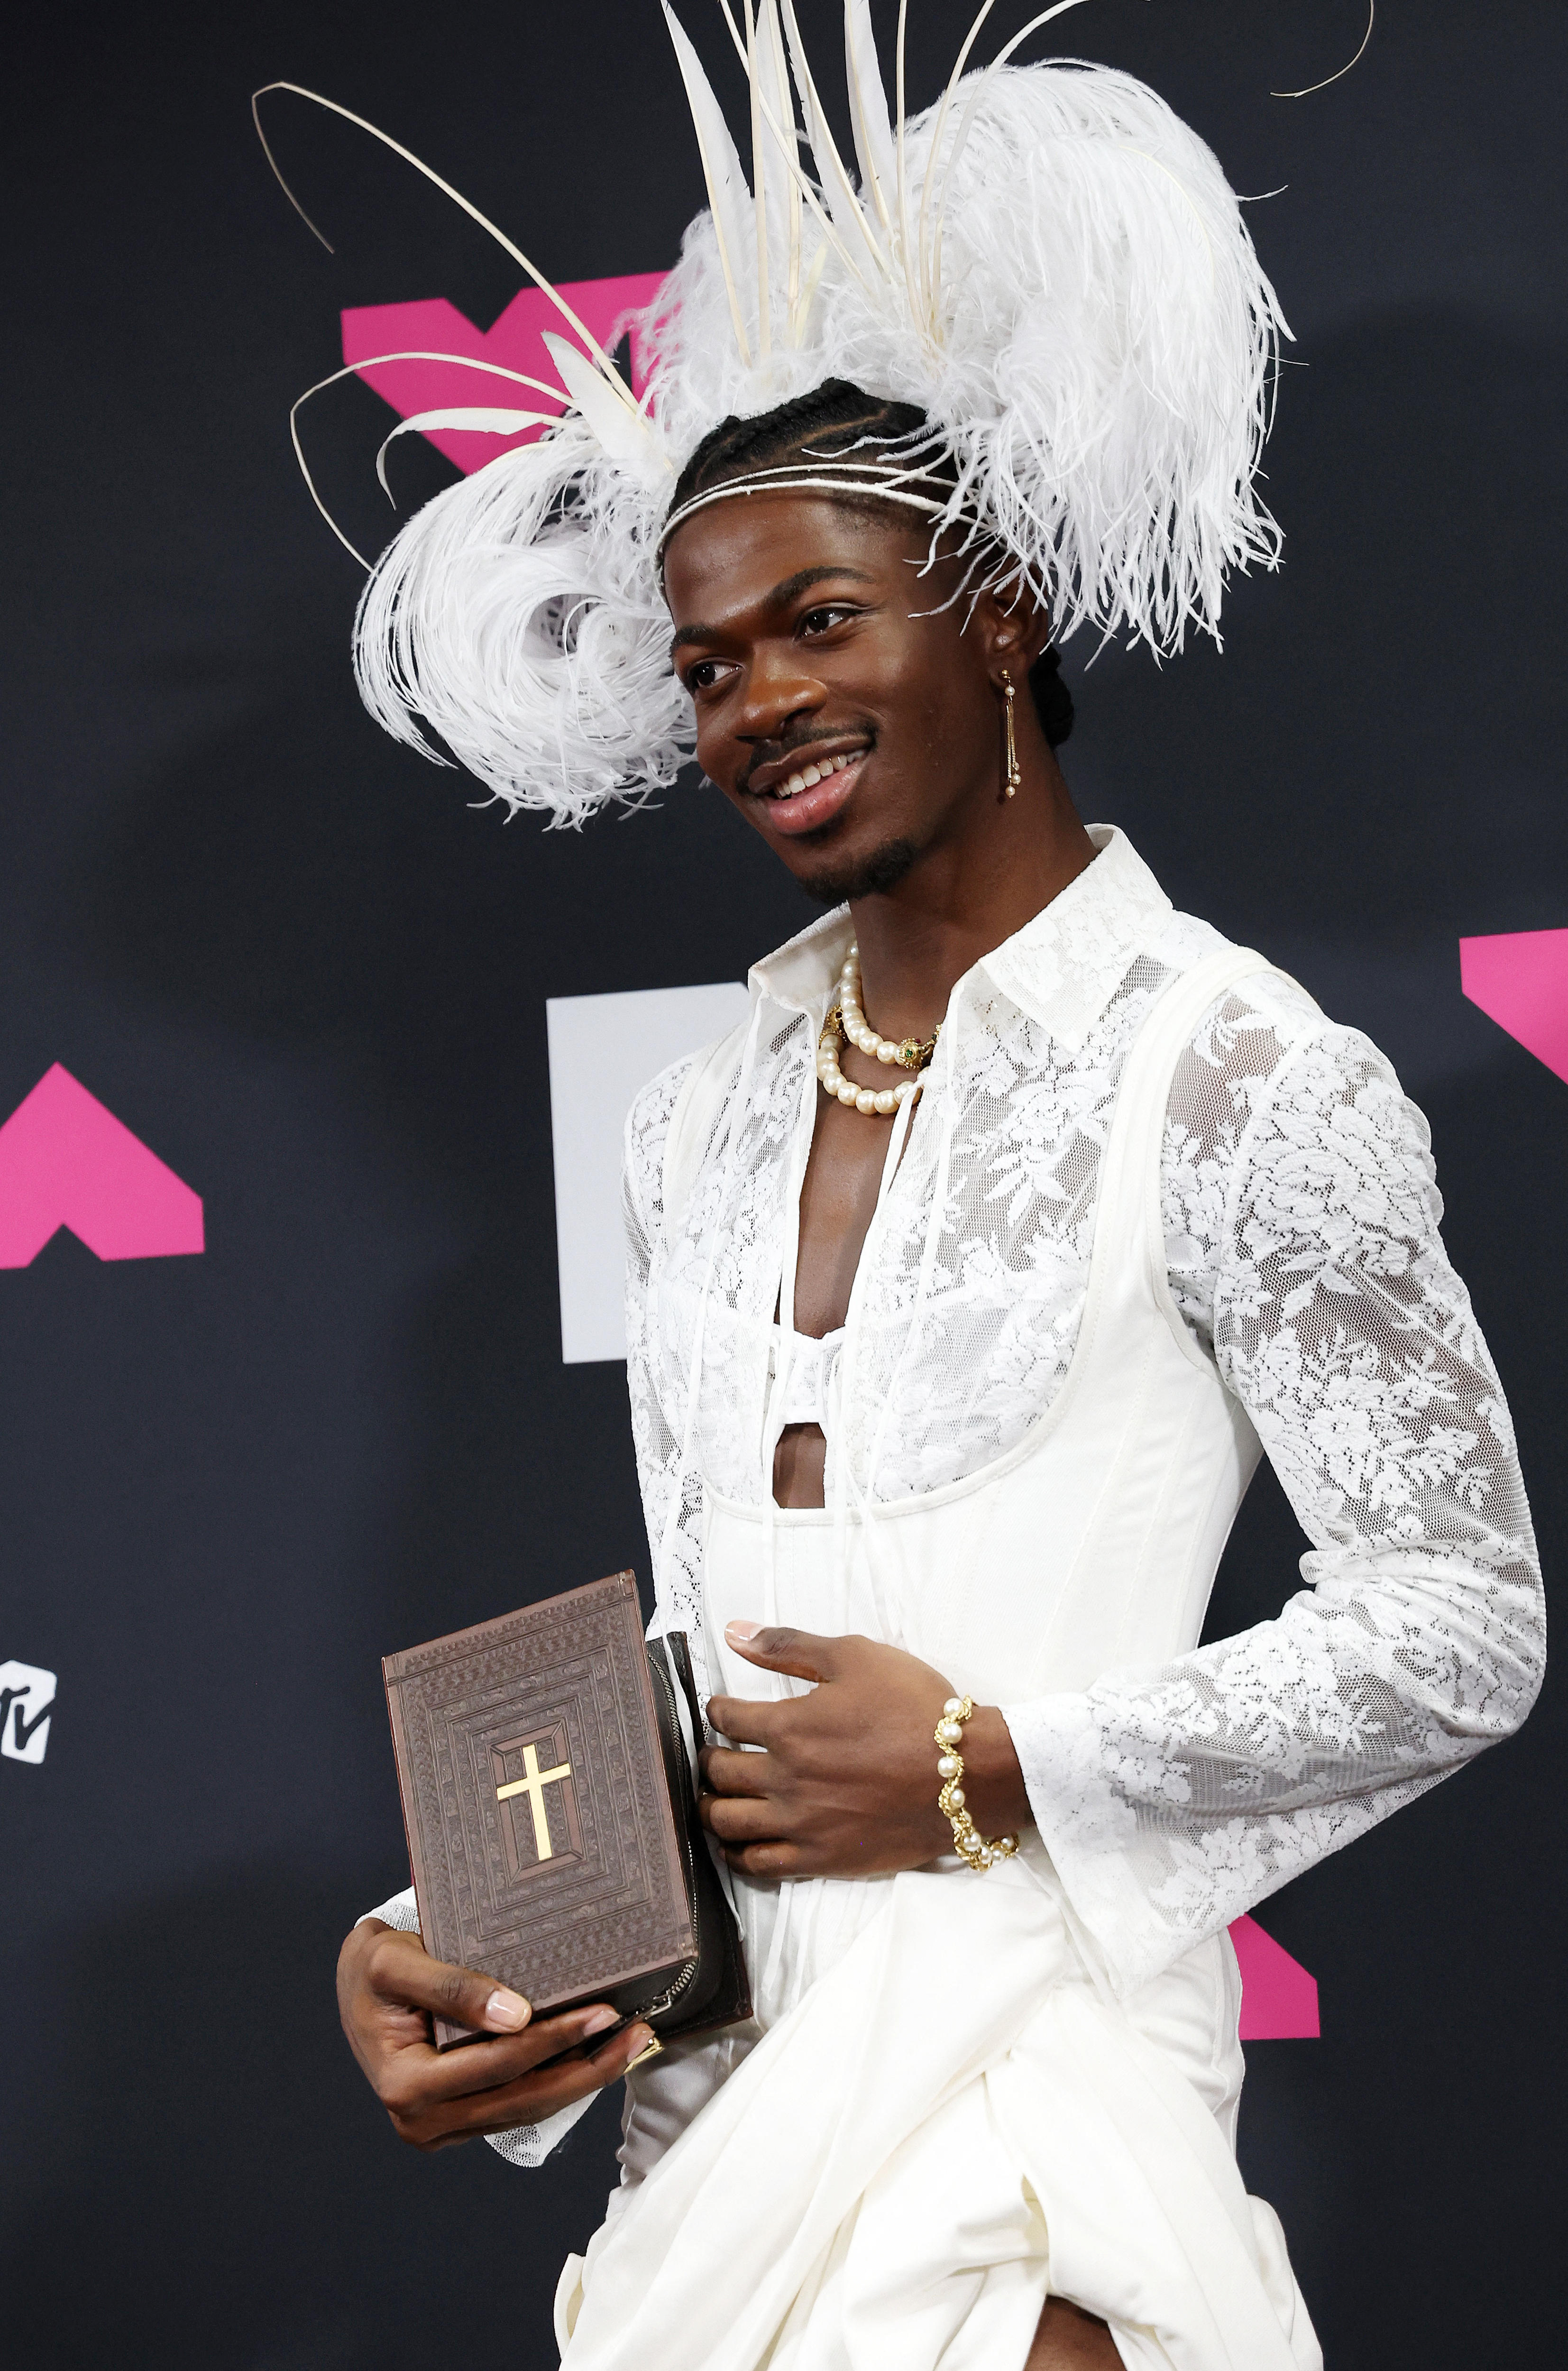 Lil Nas X poses wearing a white laced top, feathers on his head and a bible in his hands.